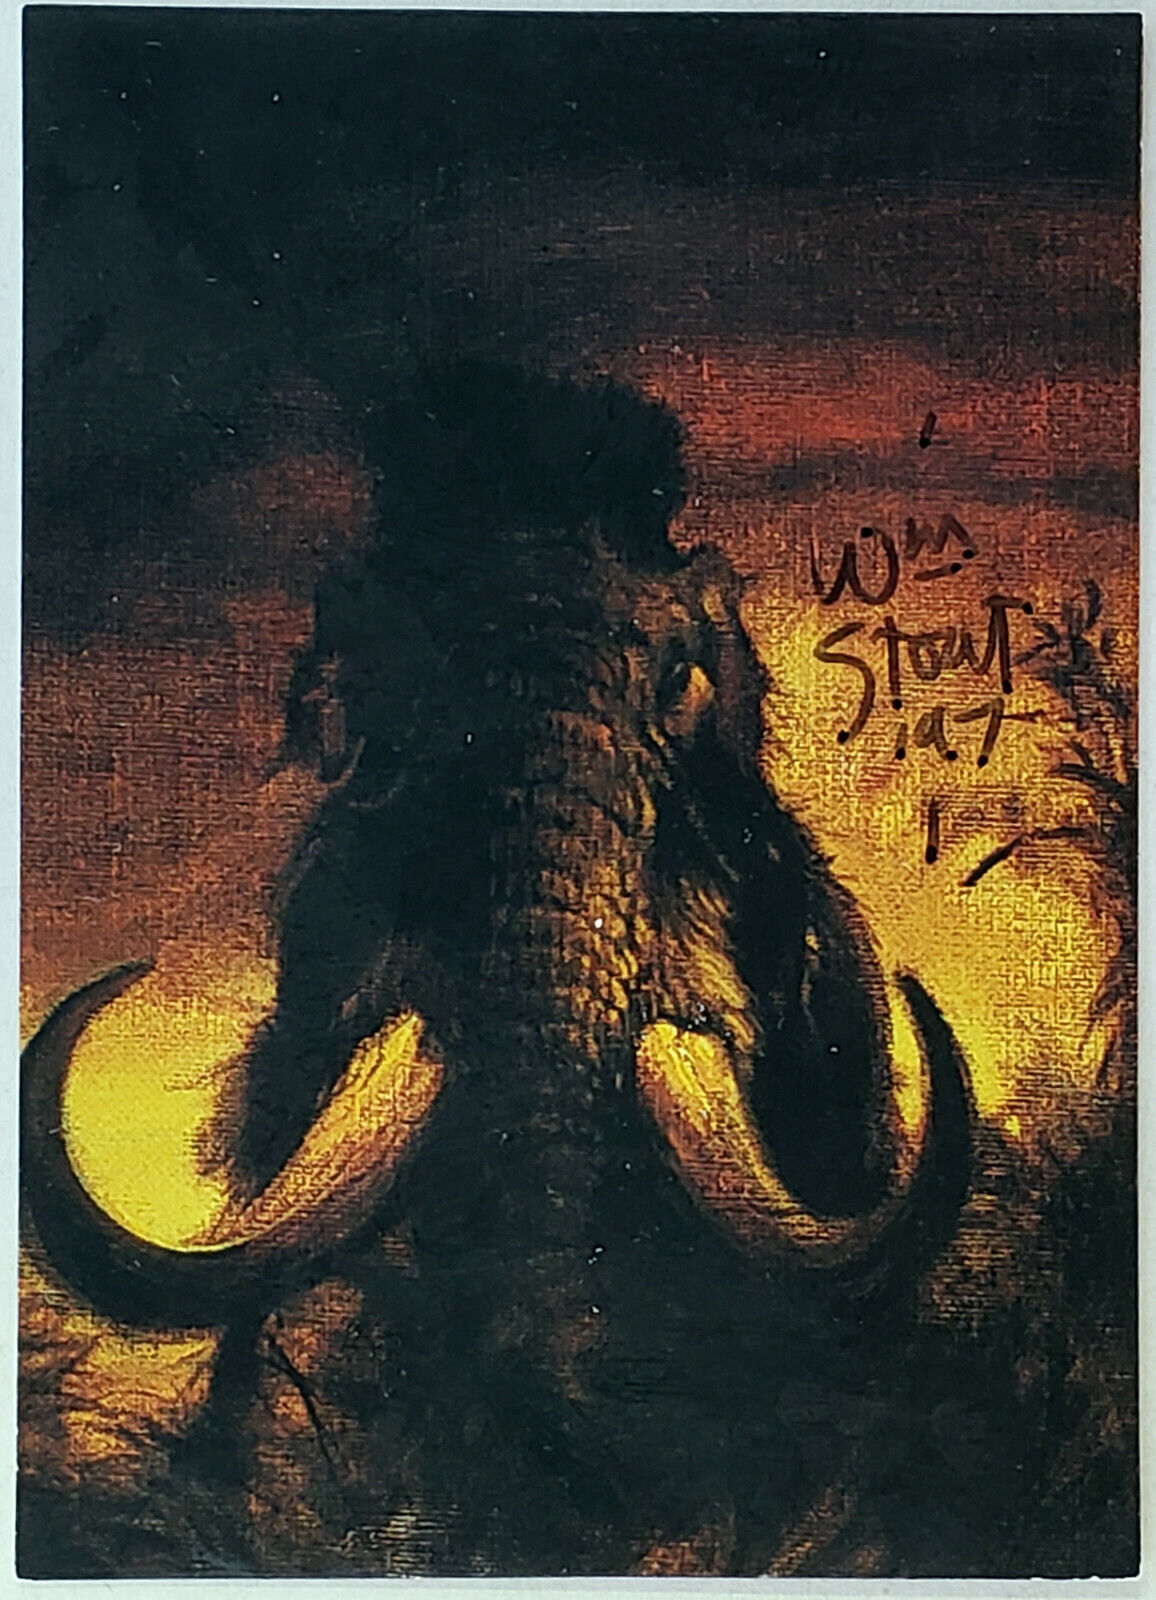 WILLIAM STOUT Lost Worlds of Saurians Sorcerers 4 Autograph Signed Cards LOT Без бренда - фотография #4